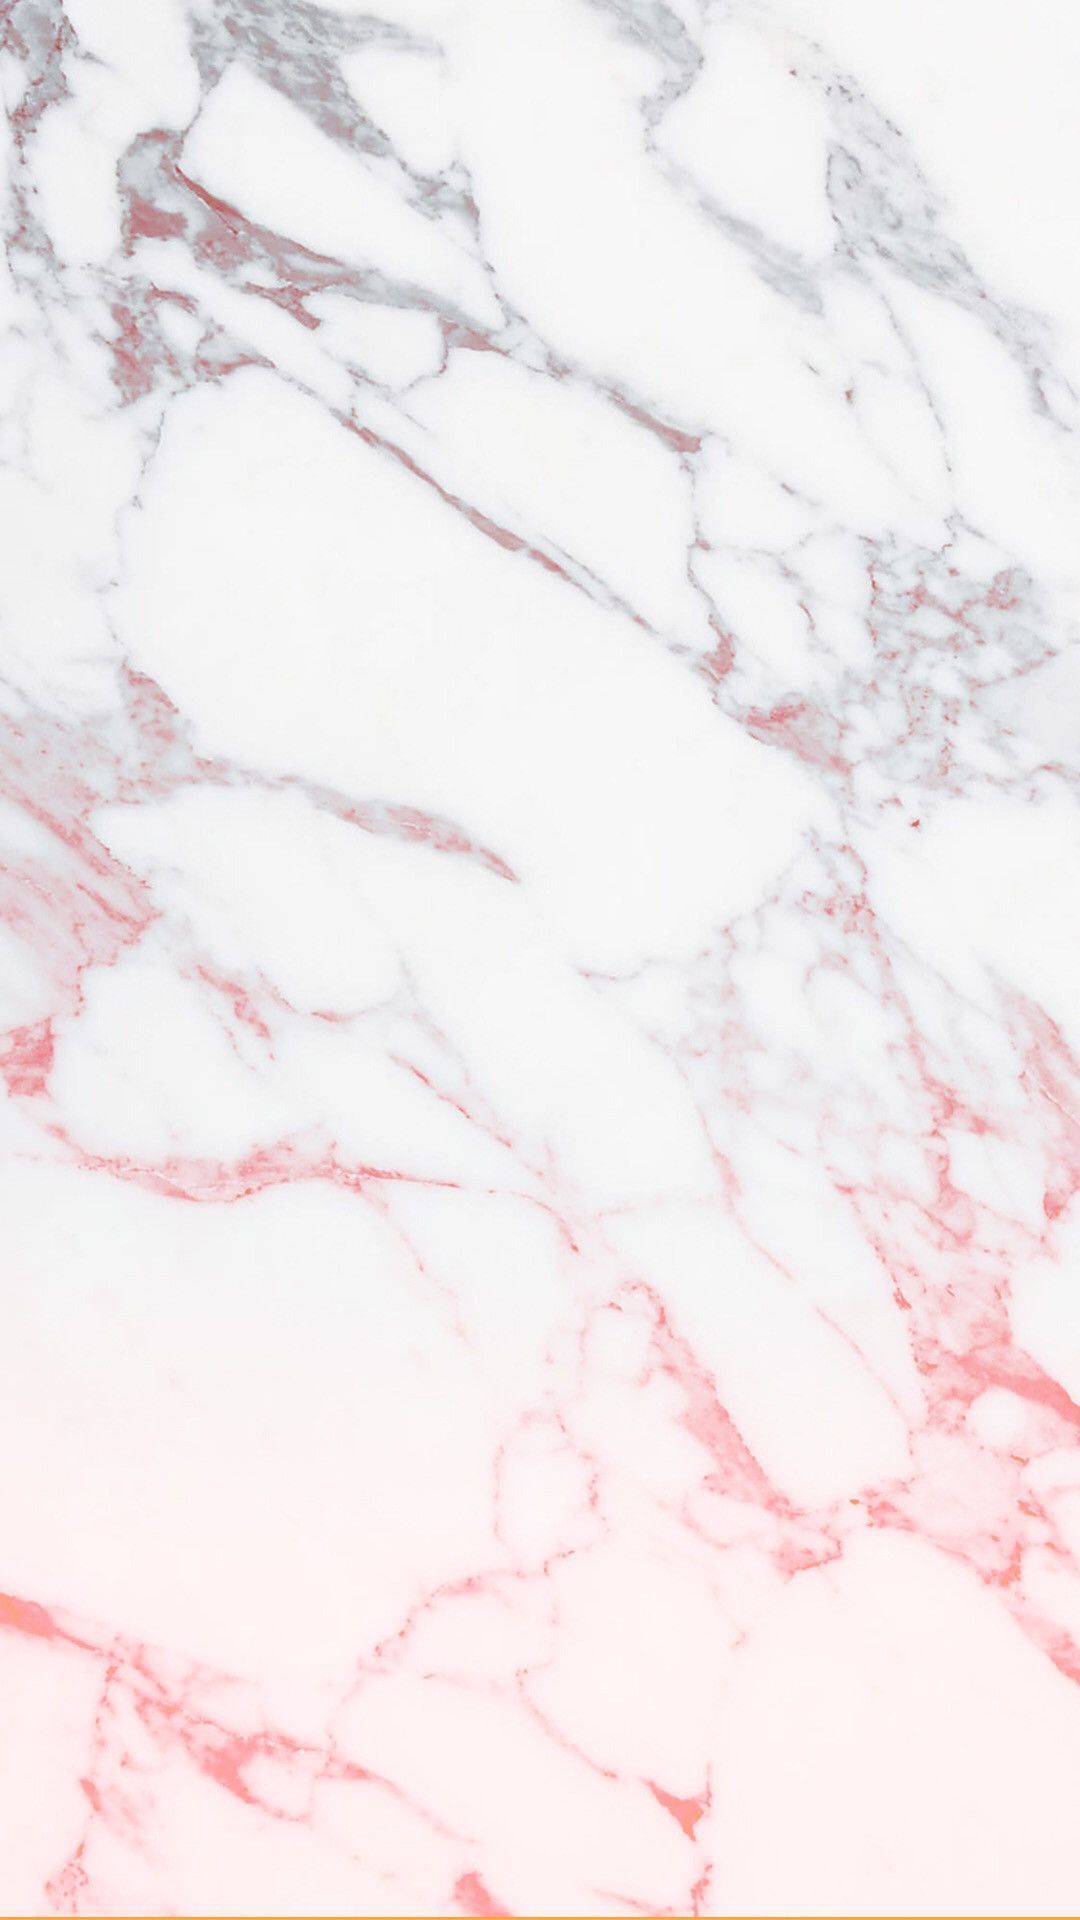 IPhone wallpaper of a rose gold marble background - Marble